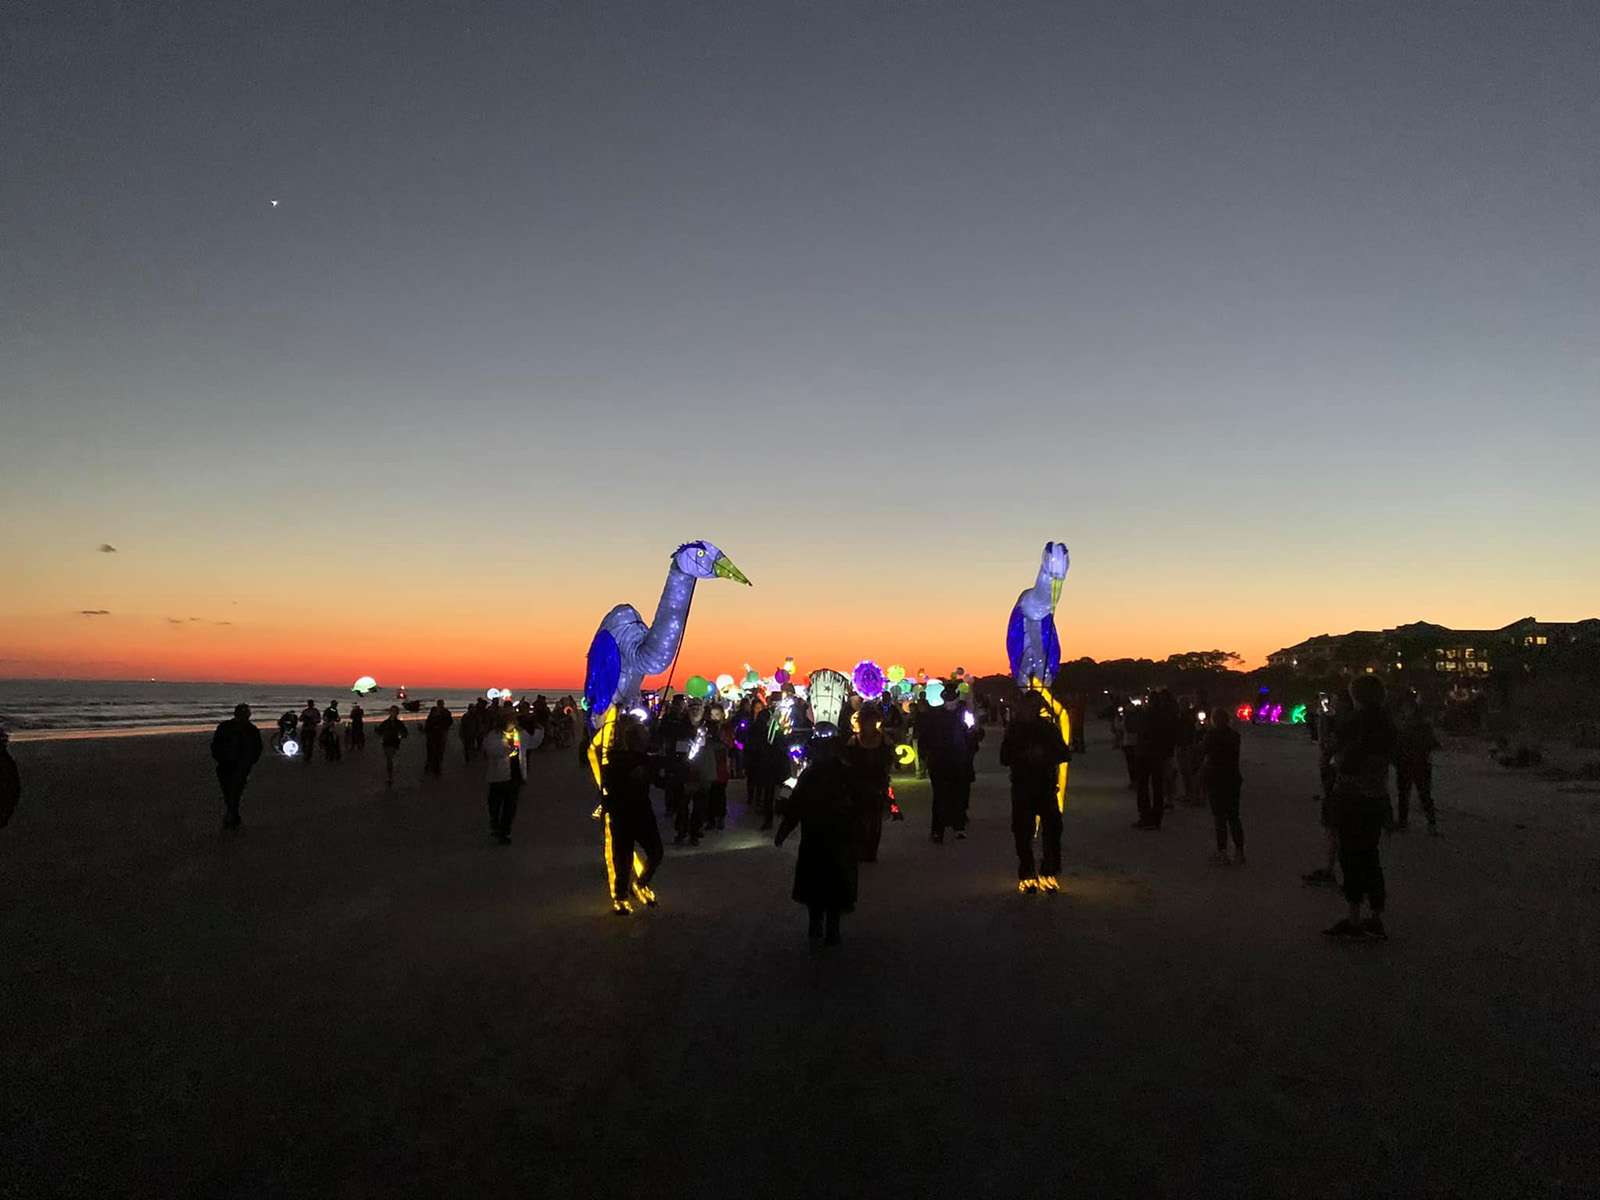 Latern Parade on the beach at sunset